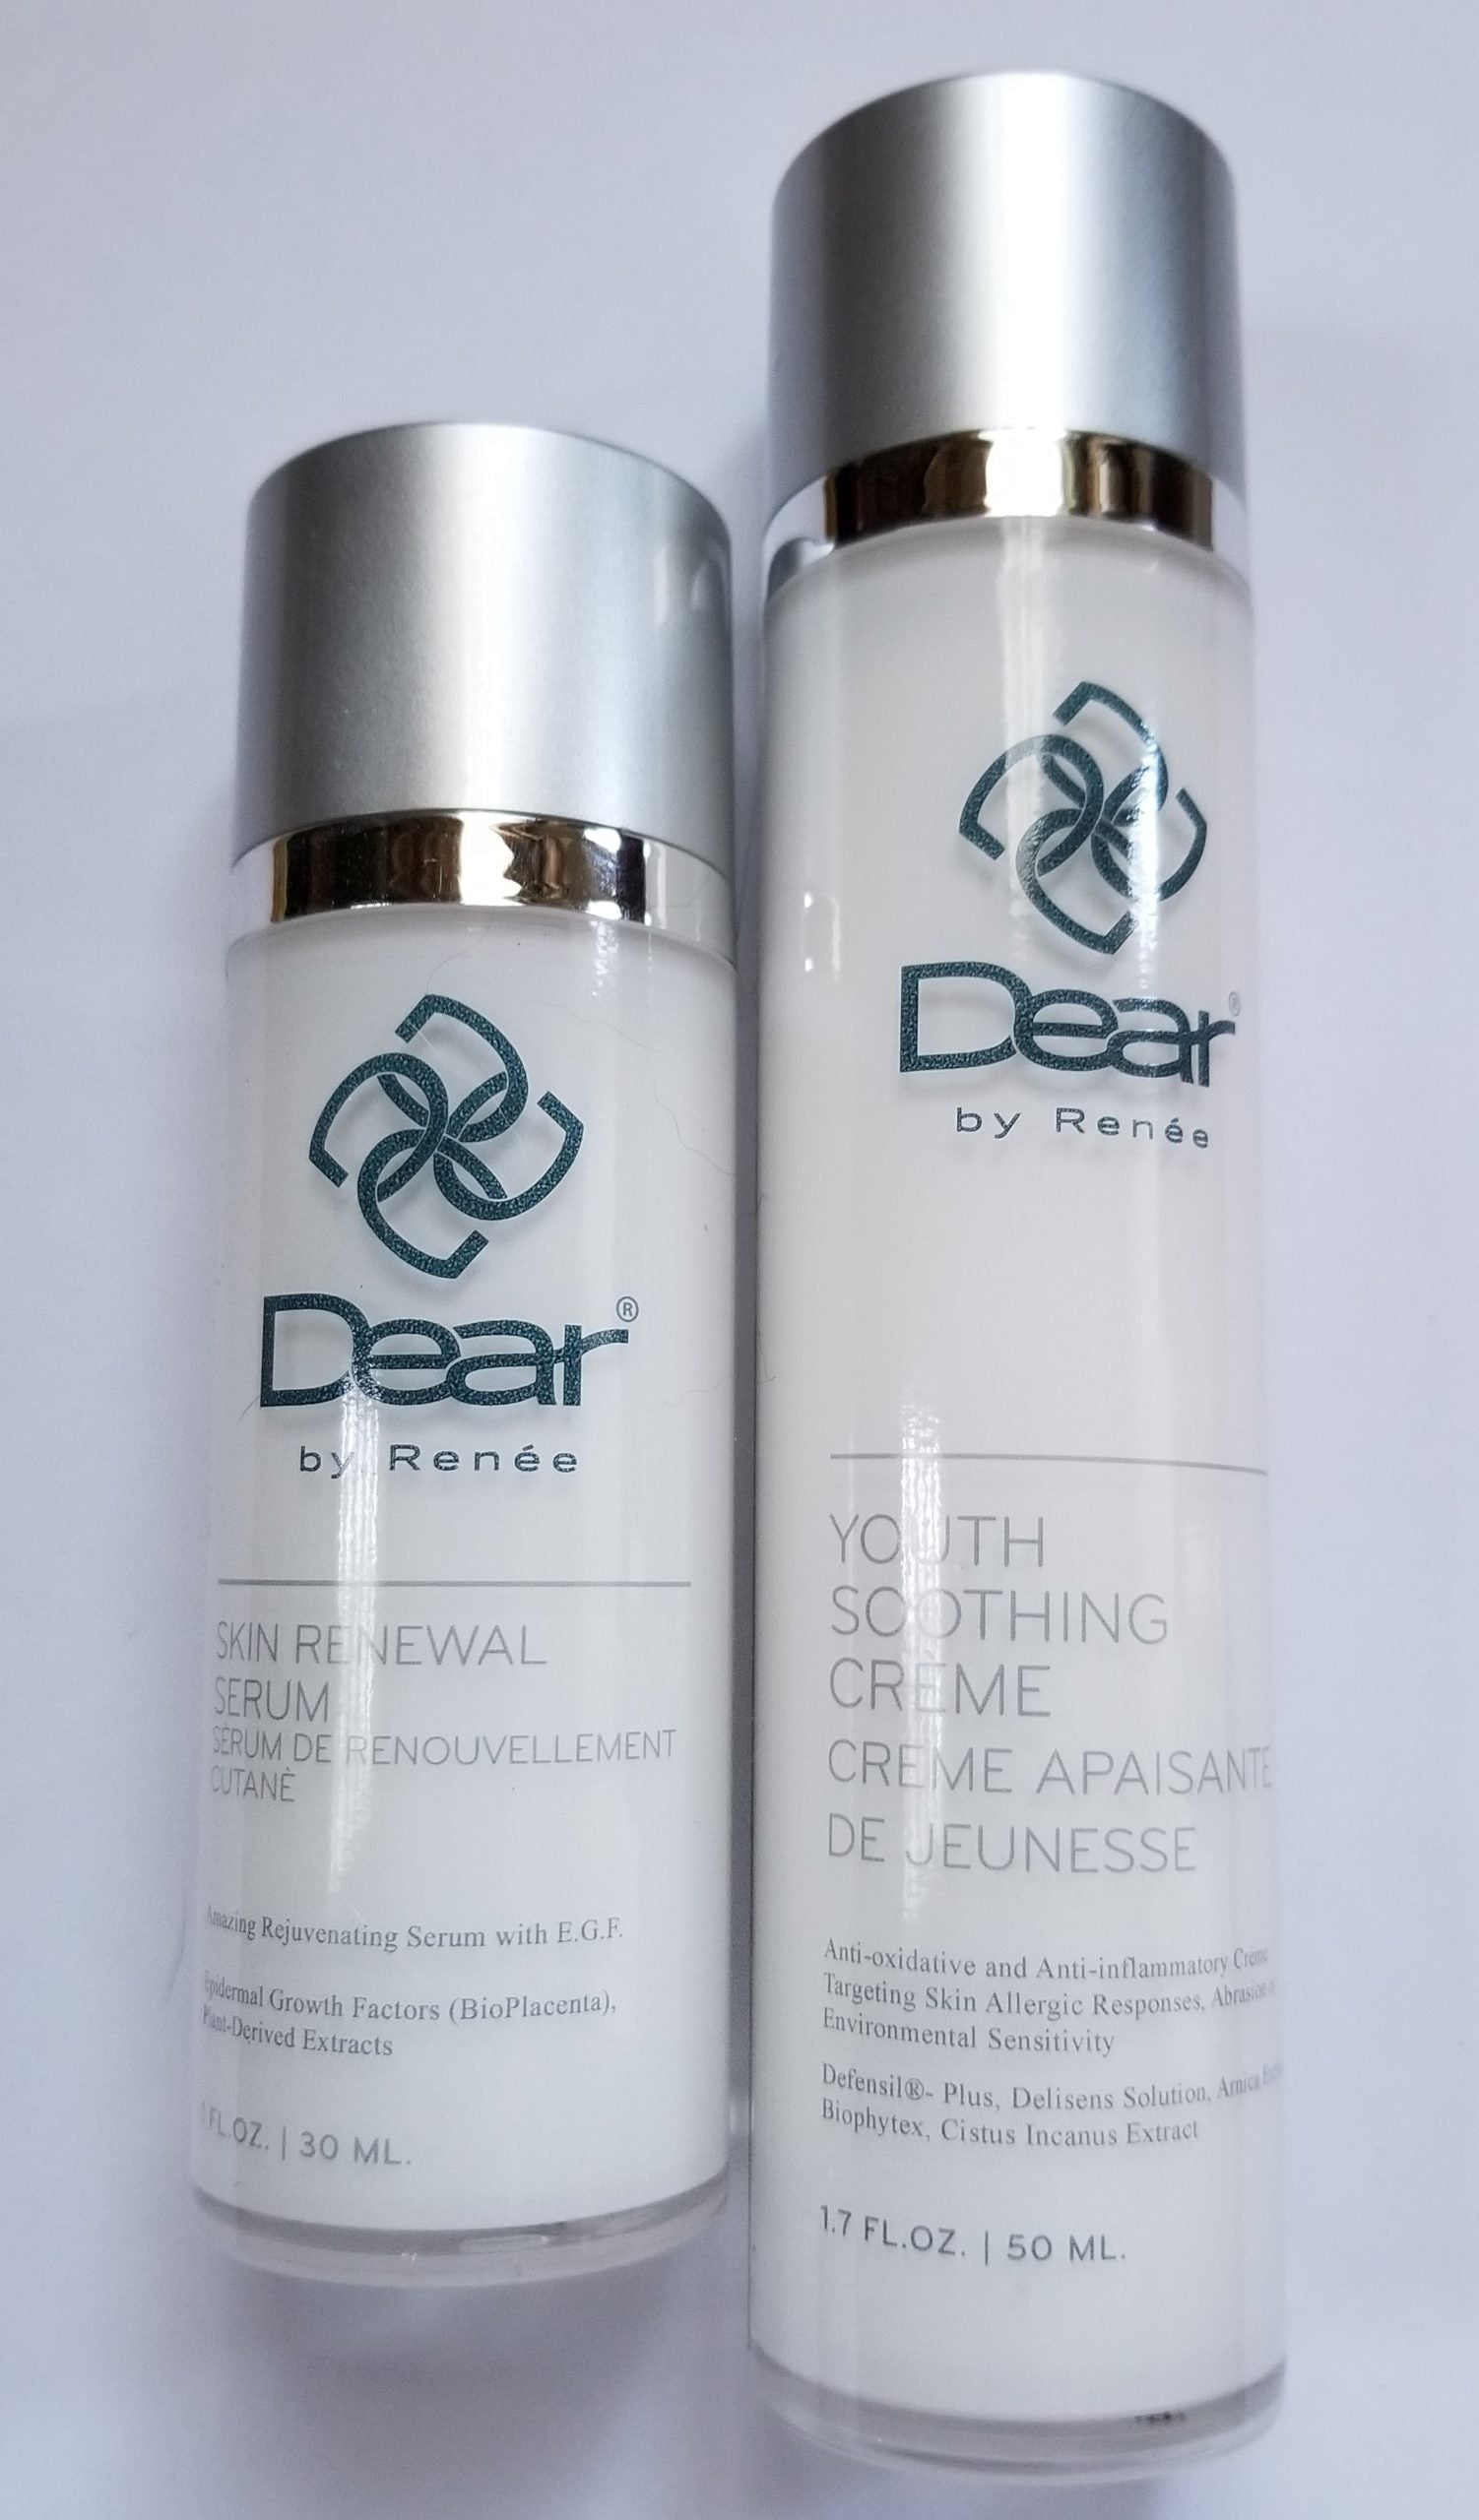 Review, Swatches, Skincare, Trends 2018, 2019: Dear by Renee Skin Renewal Serum, Youth Soothing Creme